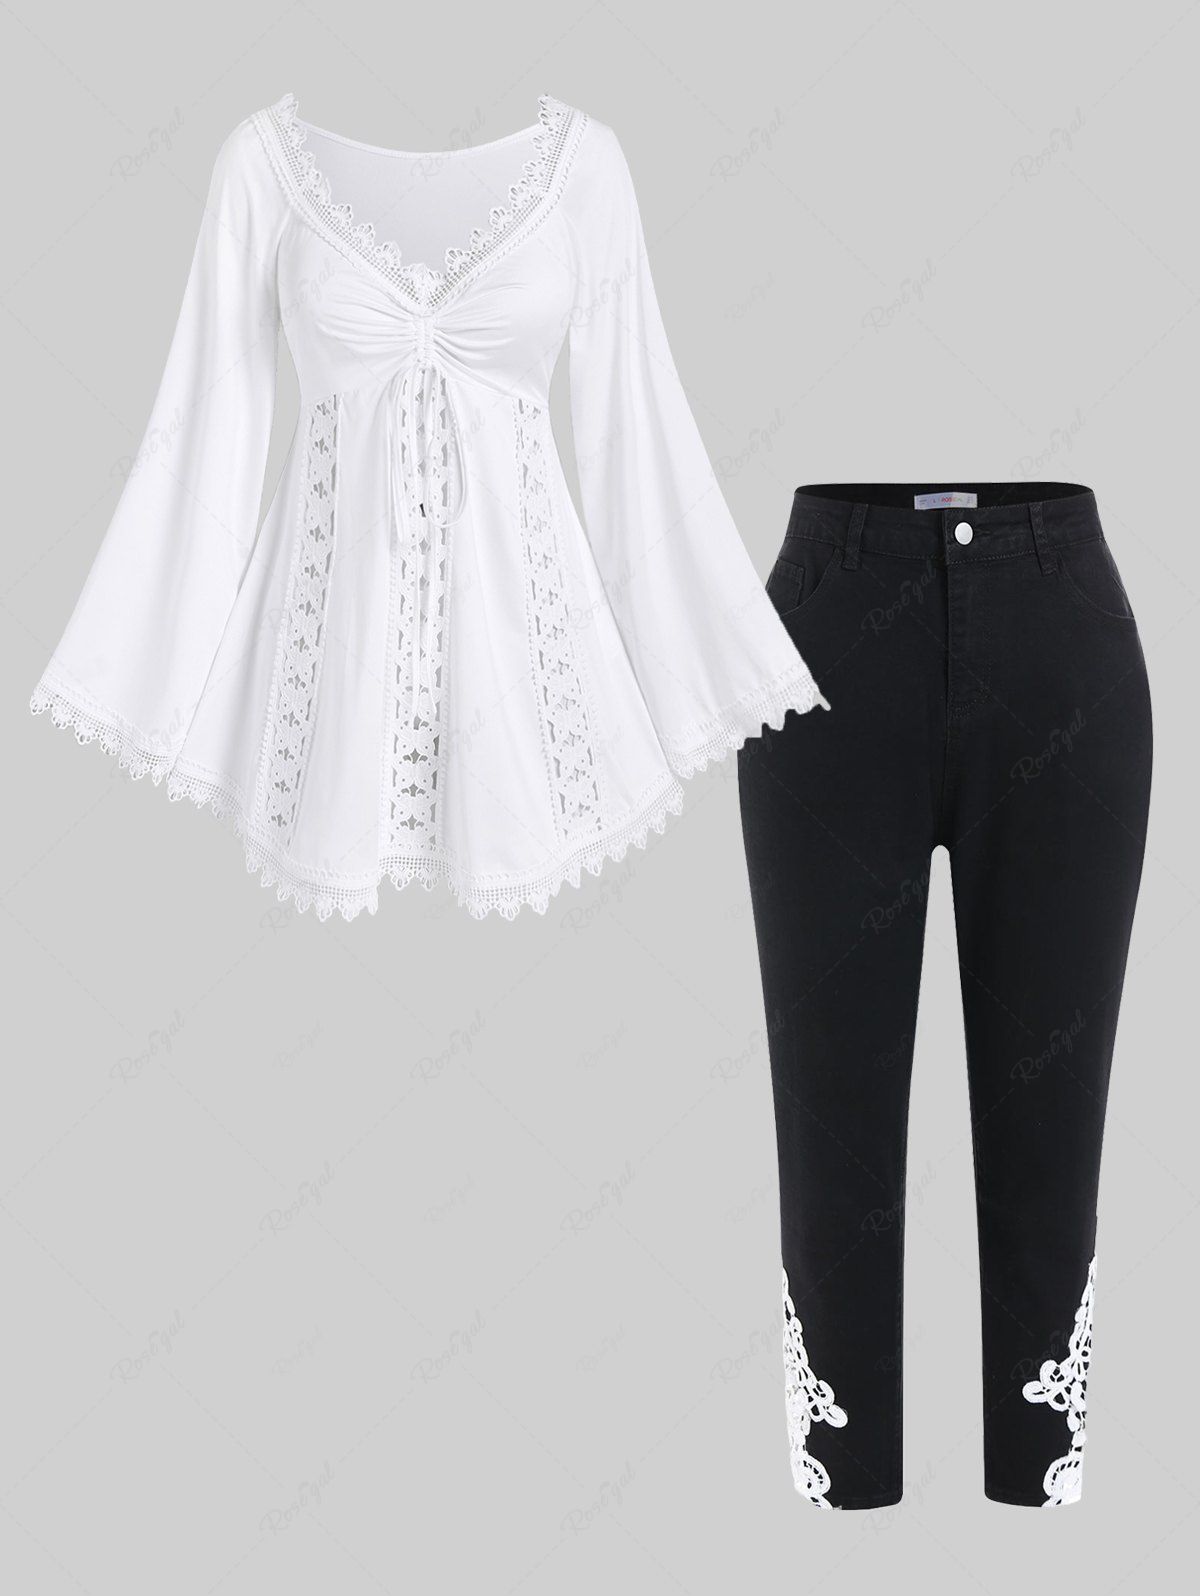 Unique Plus Size Lace Trim Hollow Out Cinched Flare Sleeves Tee and High Rise Jeans Outfit  